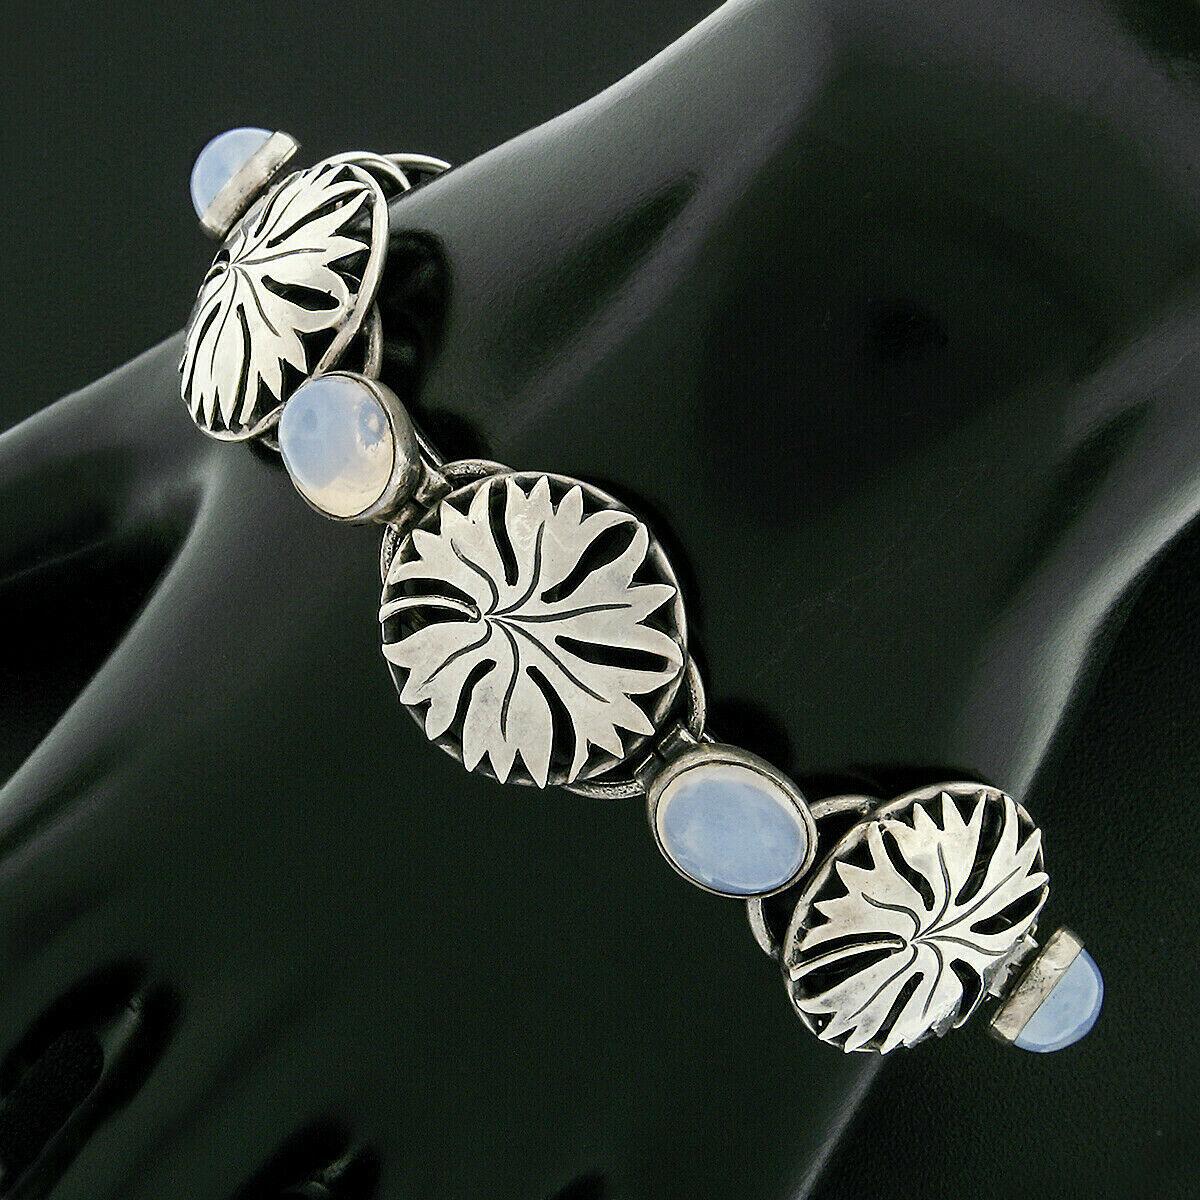 Here we have a gorgeous antique designer bracelet crafted in Denmark by Lauritz Jensen during the art nouveau period. The bracelet is solid 830 silver and features 6 pierced round foliage links which alternate with 6 oval cabochon cut natural